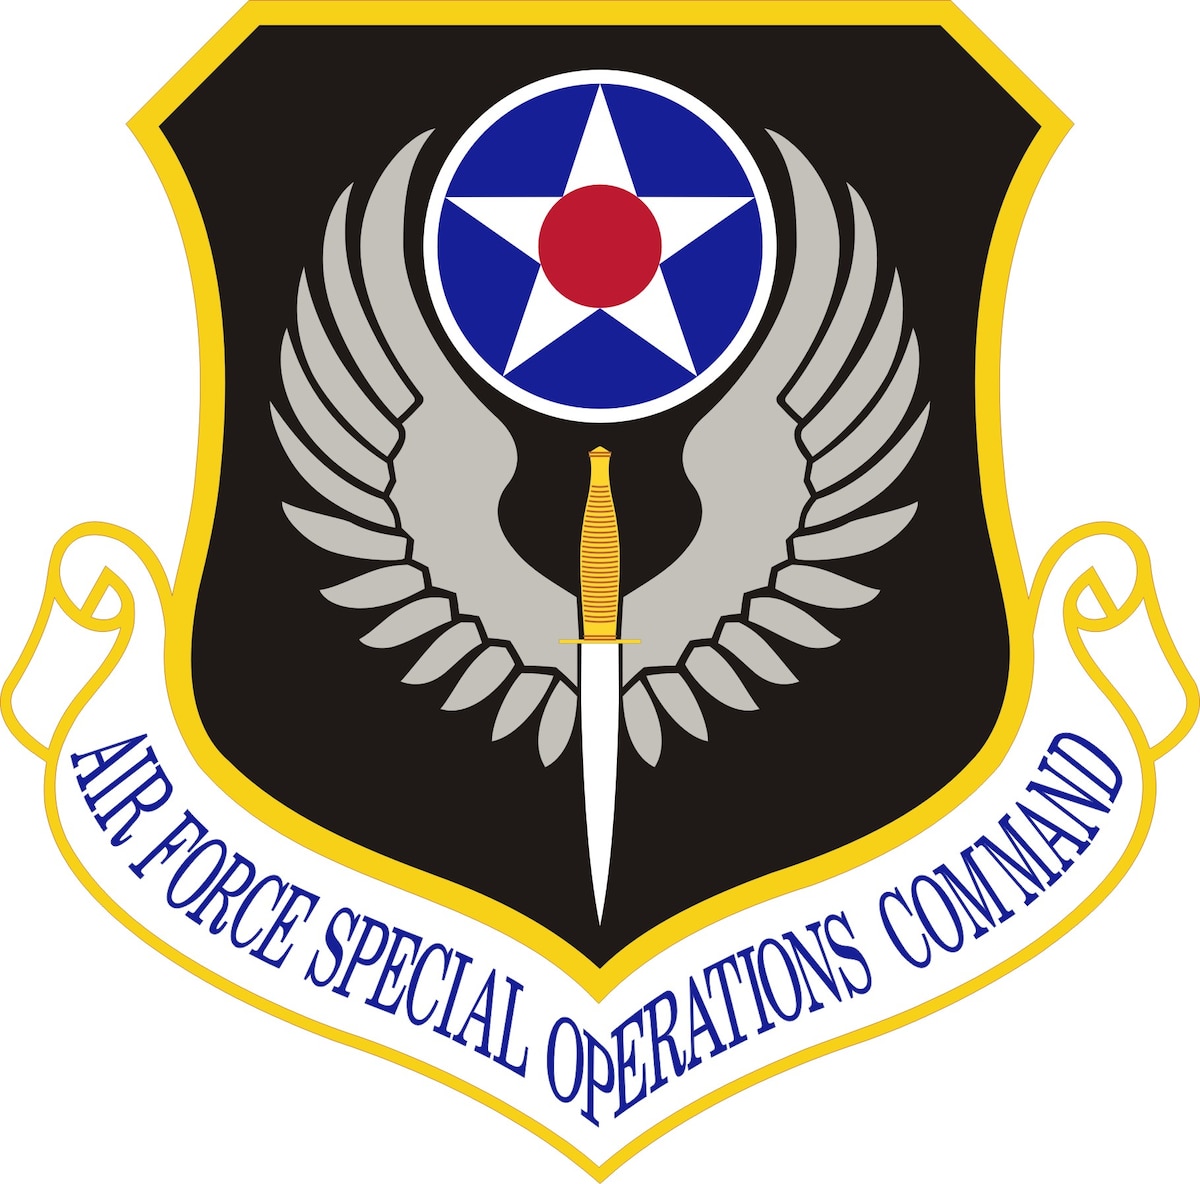 History of AFSOC emblem > Air Force Special Operations Command > Display